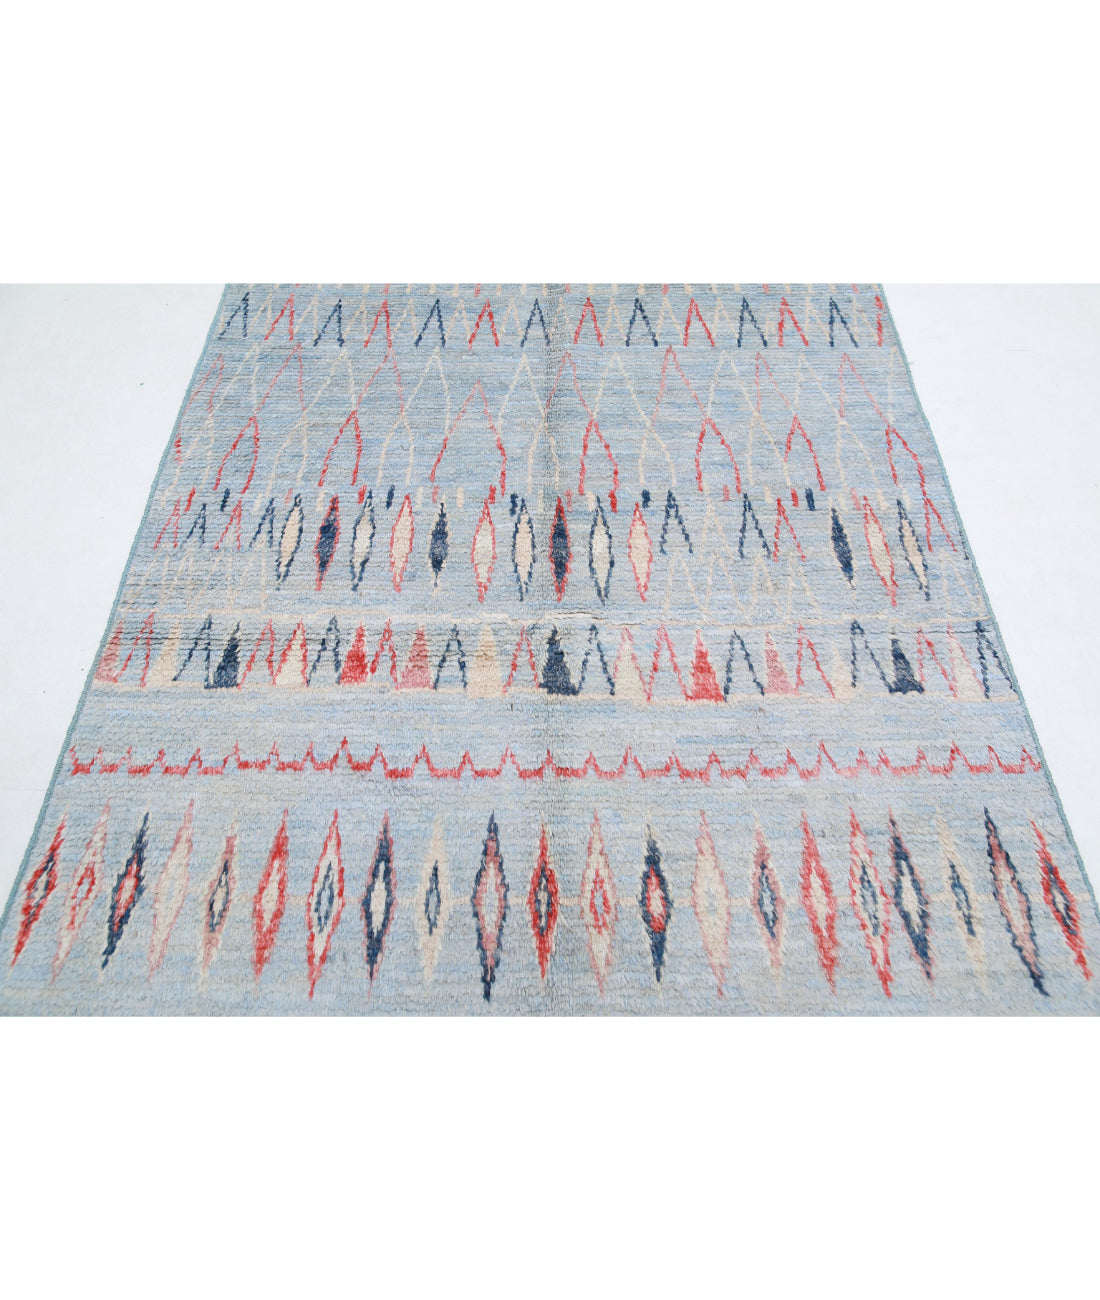 Hand Knotted Tribal Moroccan Wool Rug - 4'9'' x 7'9'' 4'9'' x 7'9'' (143 X 233) / Blue / Red